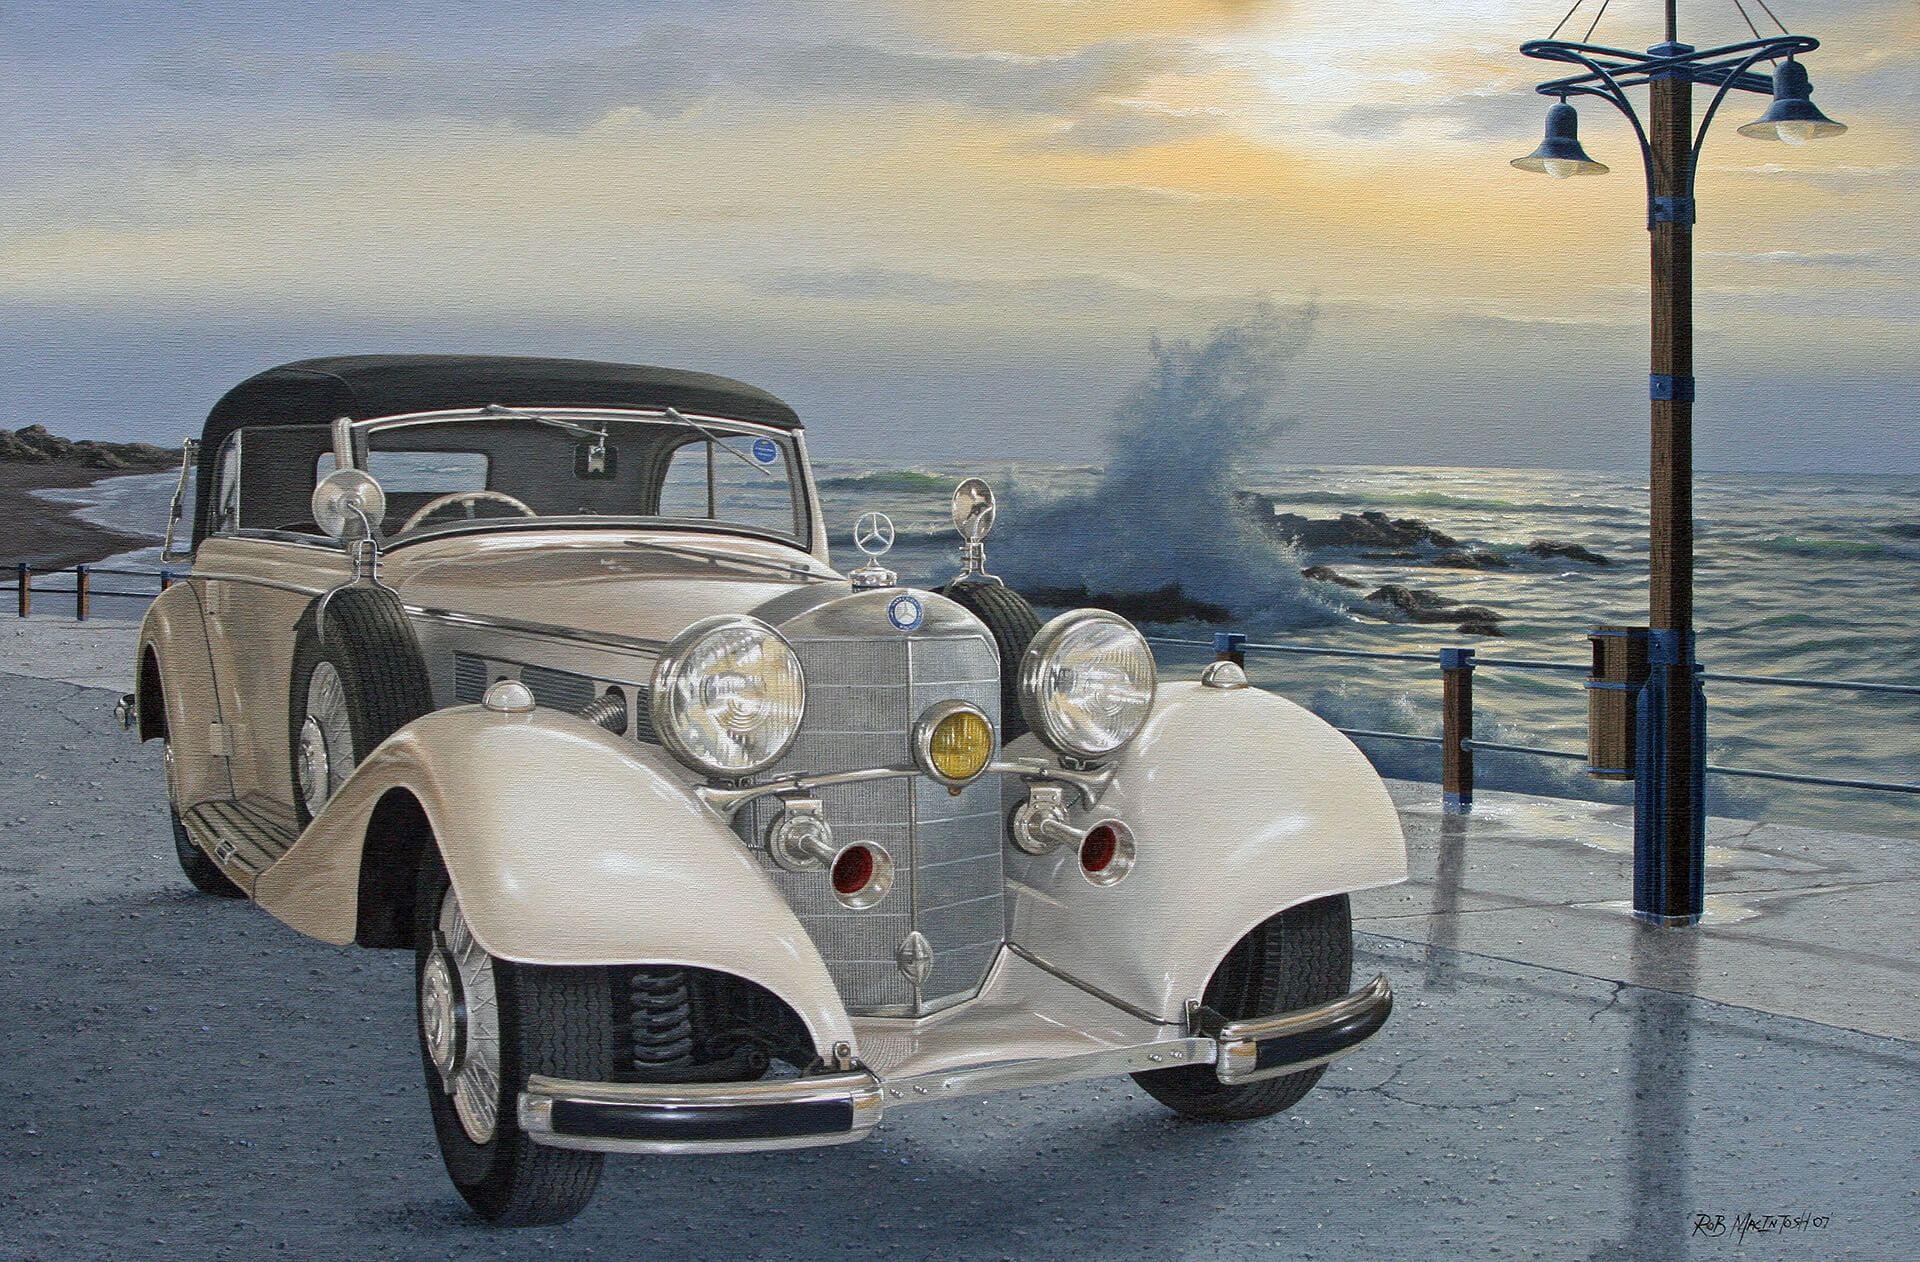 Photorealistic painting of an old car parked on a pier